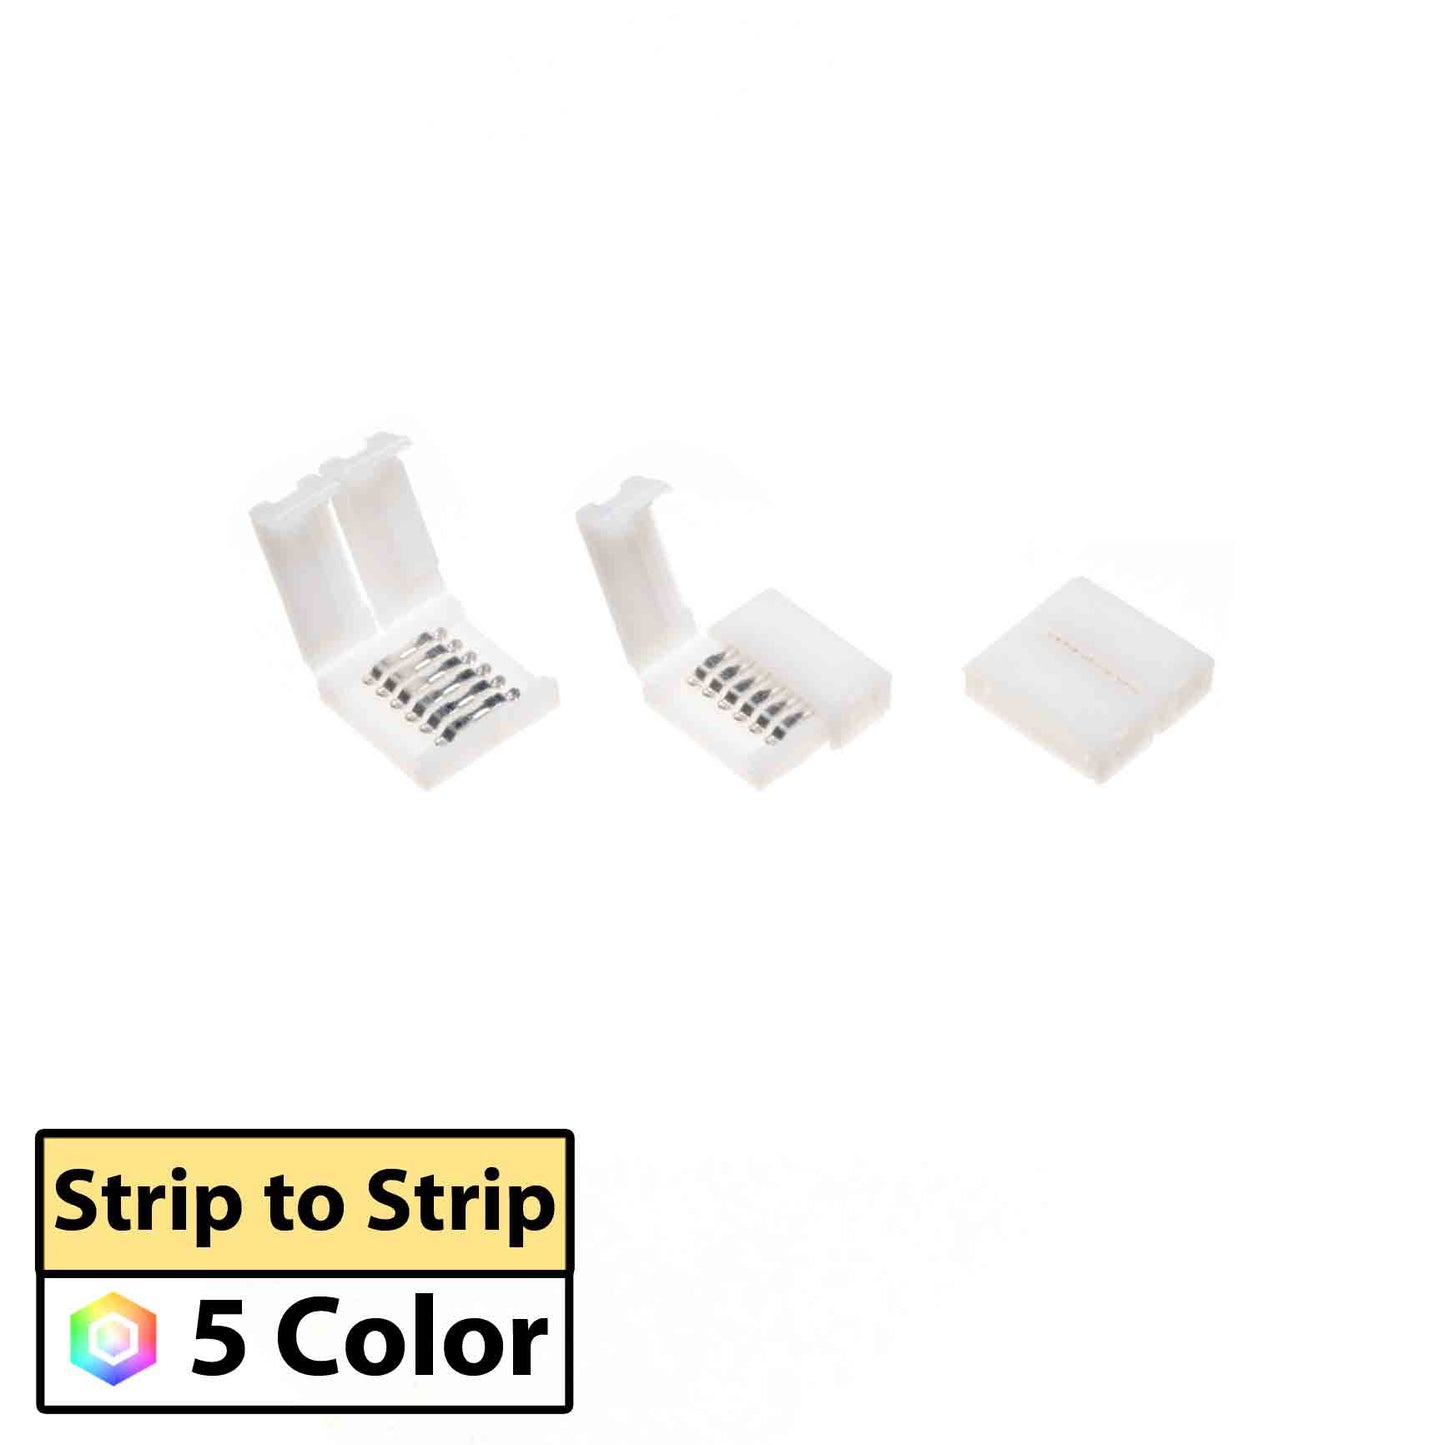 PN 3077 | LED Strip to Strip | Solderless Gapless Connector for 5-in-1 LED Strip - 10 PACK